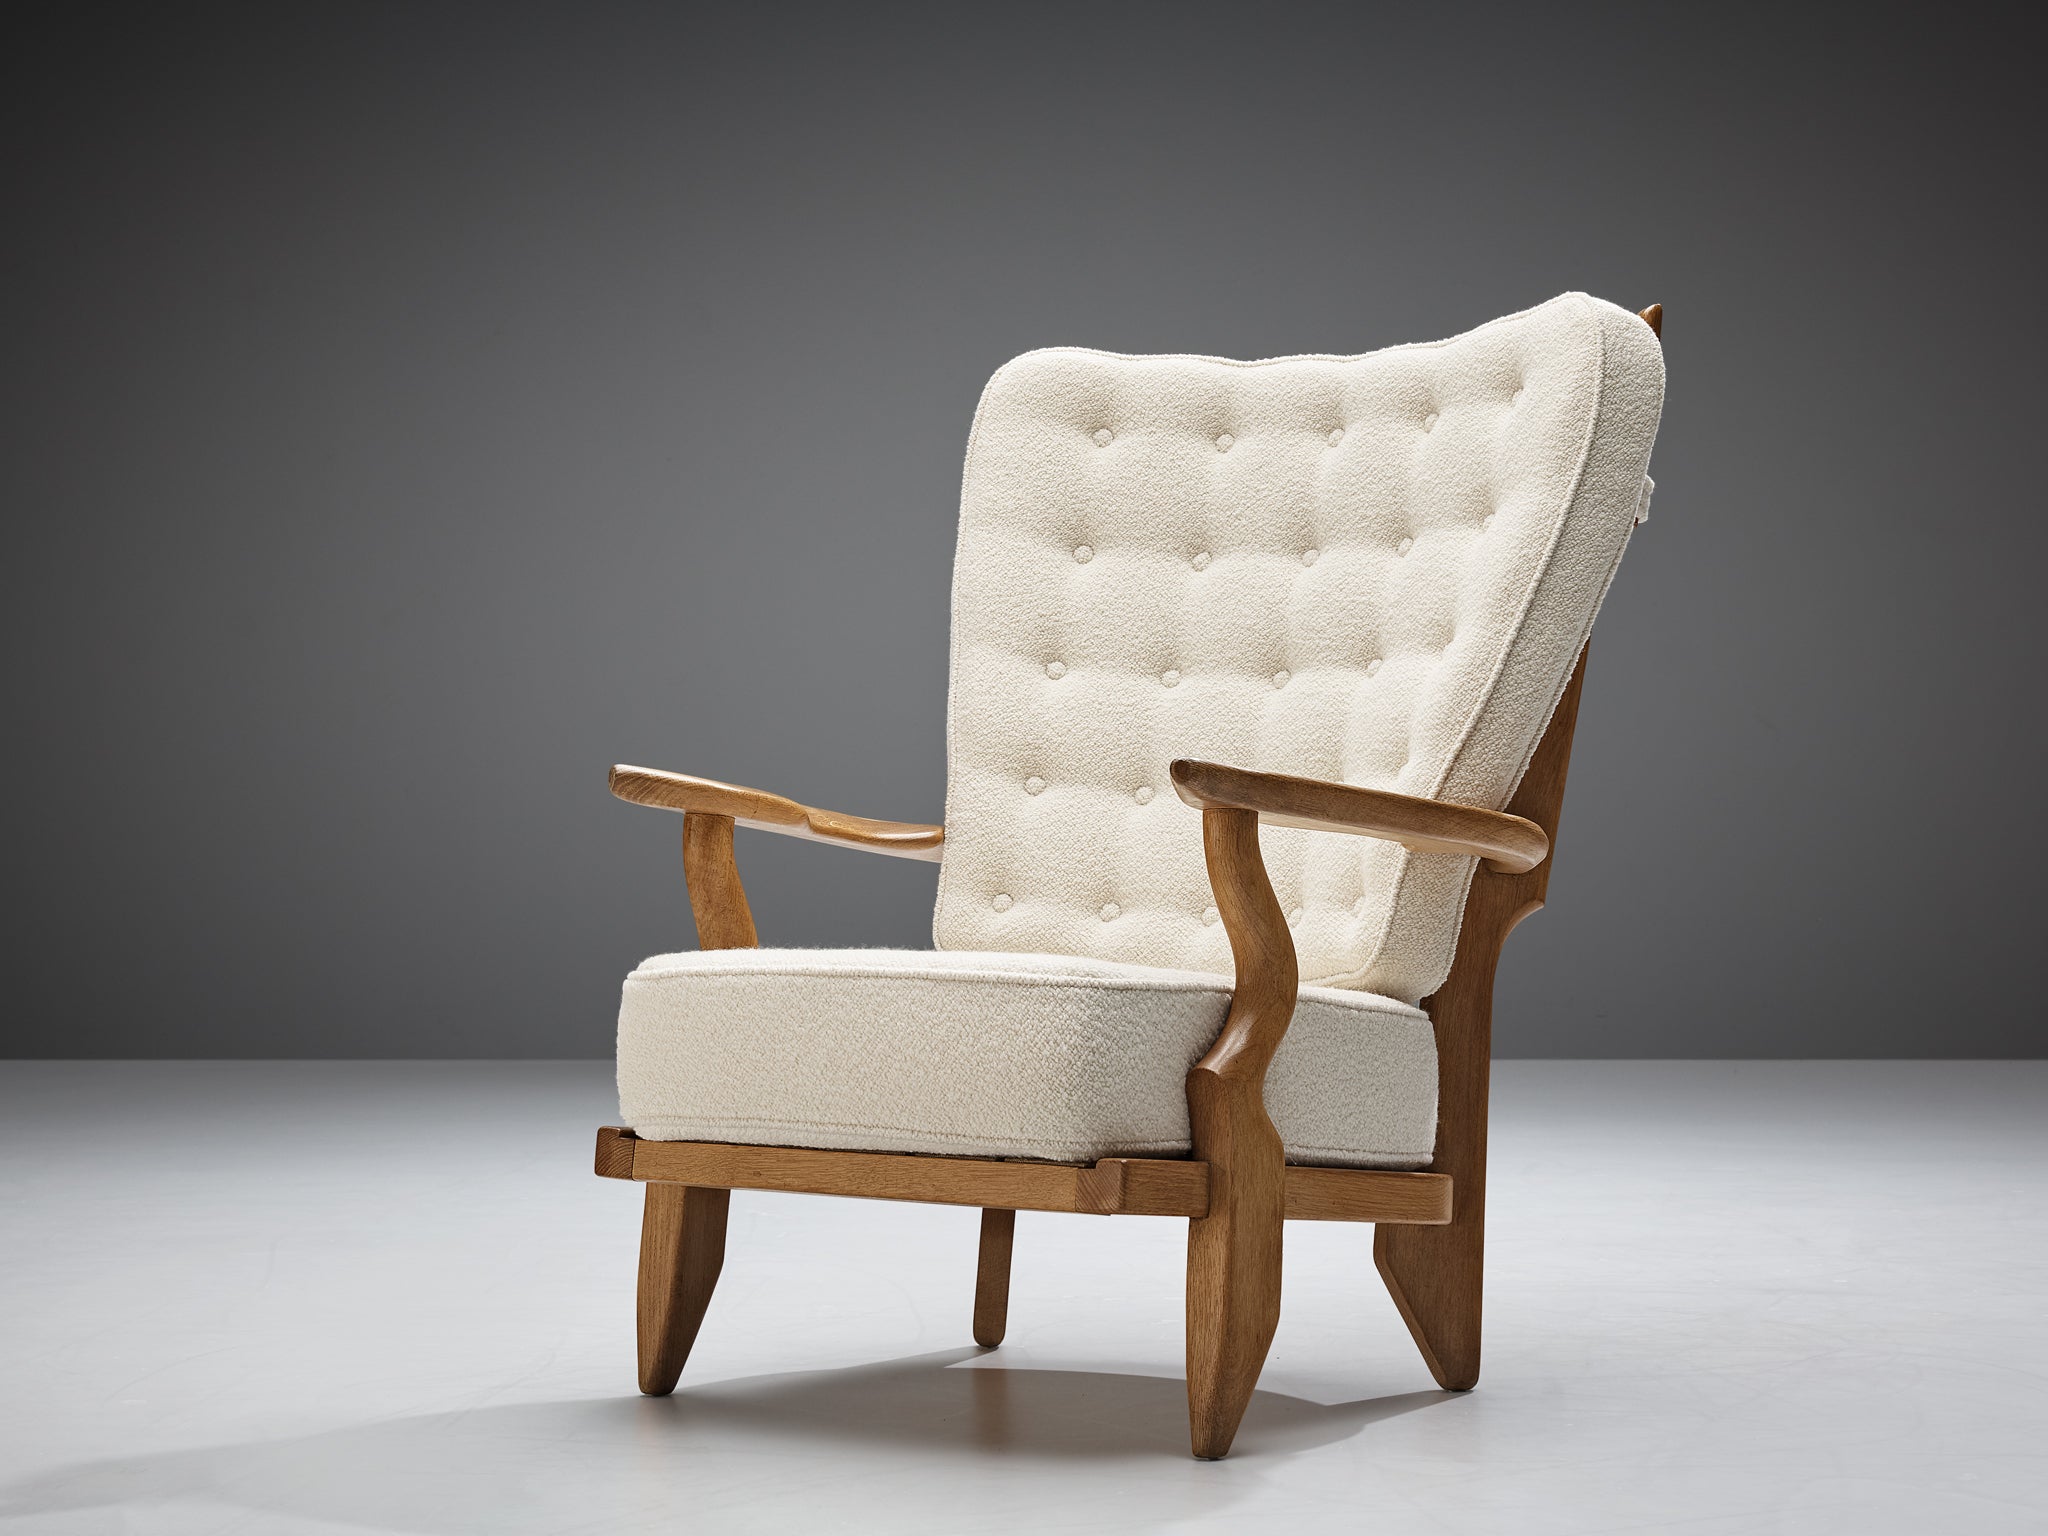 Guillerme & Chambron 'Grand Repos' Lounge Chair in Oak and White Upholstery